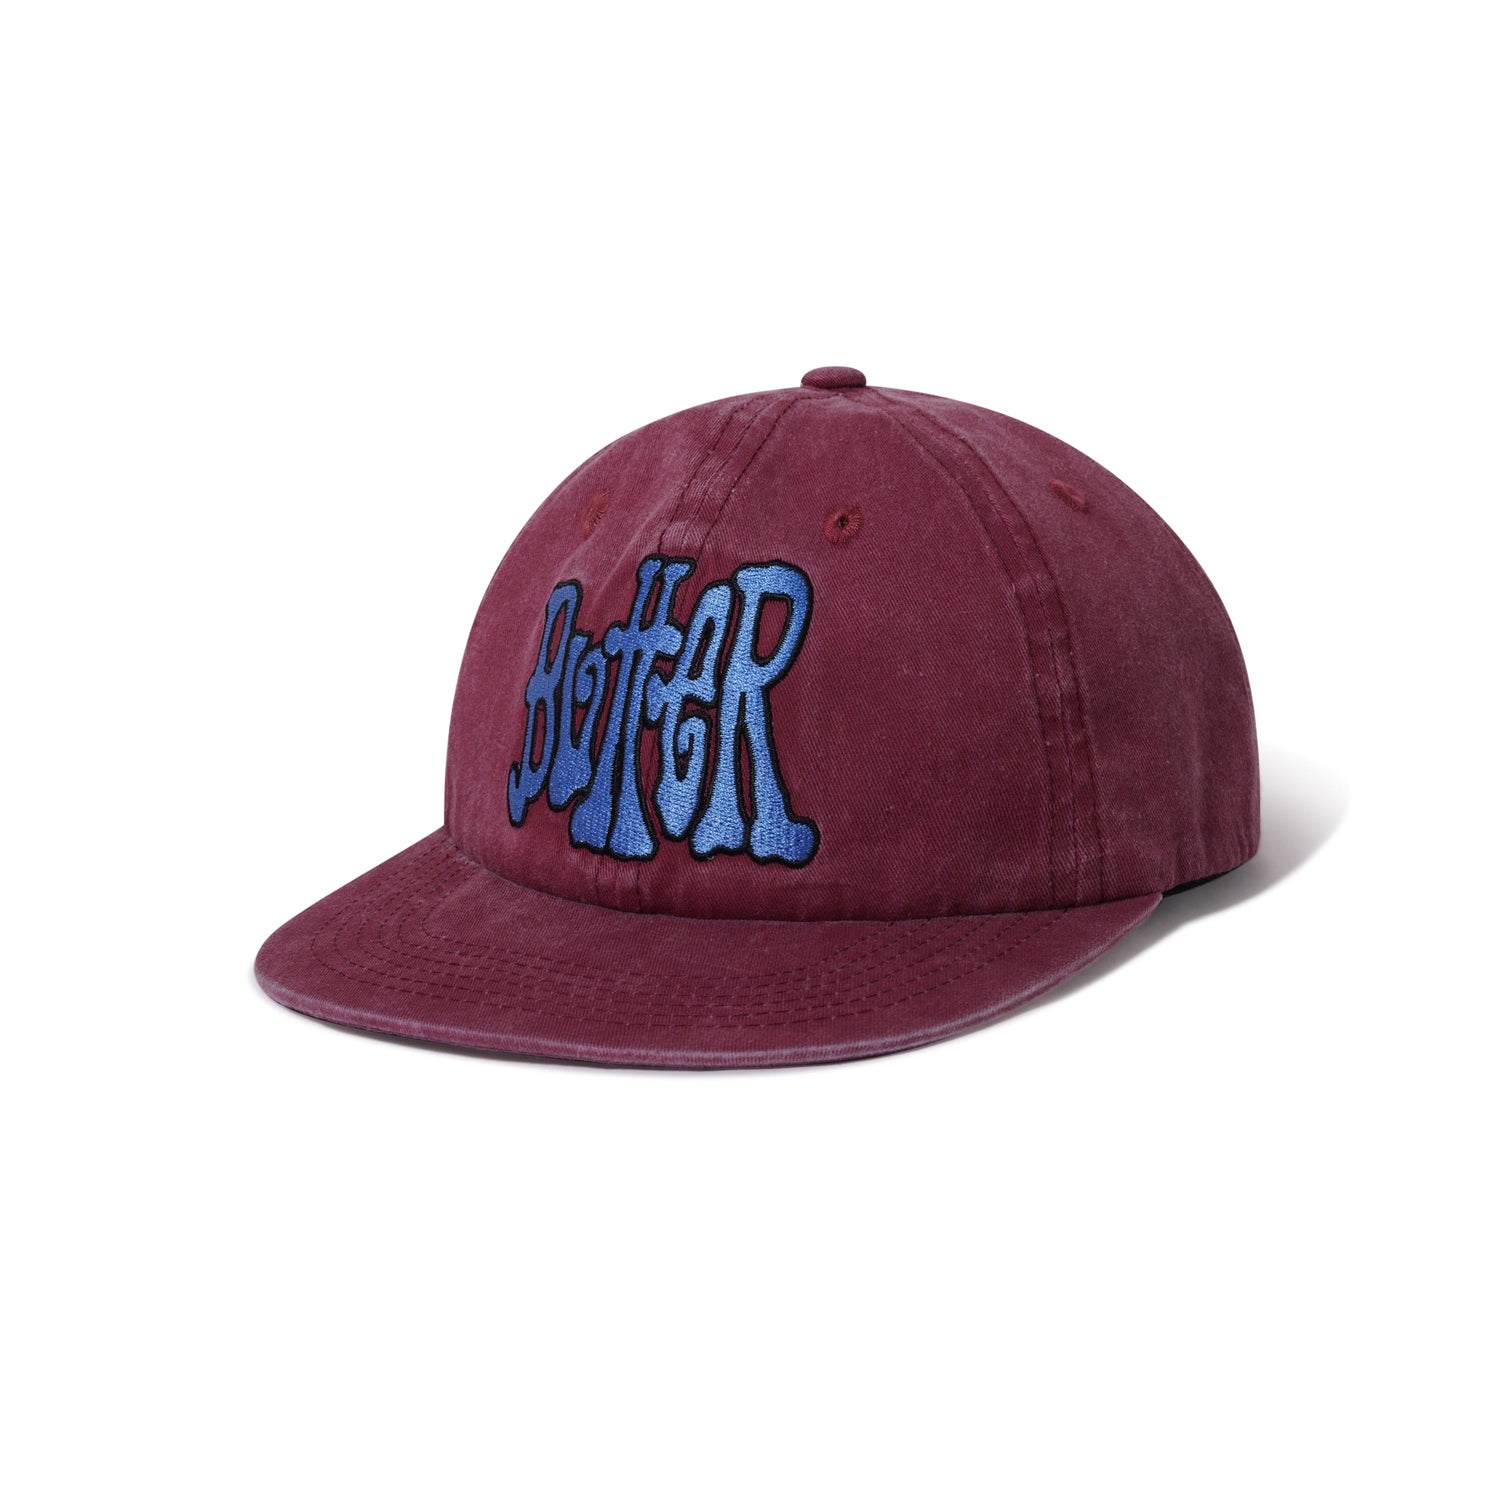 Butter Goods Tour 6 Panel Cap - Washed Brick